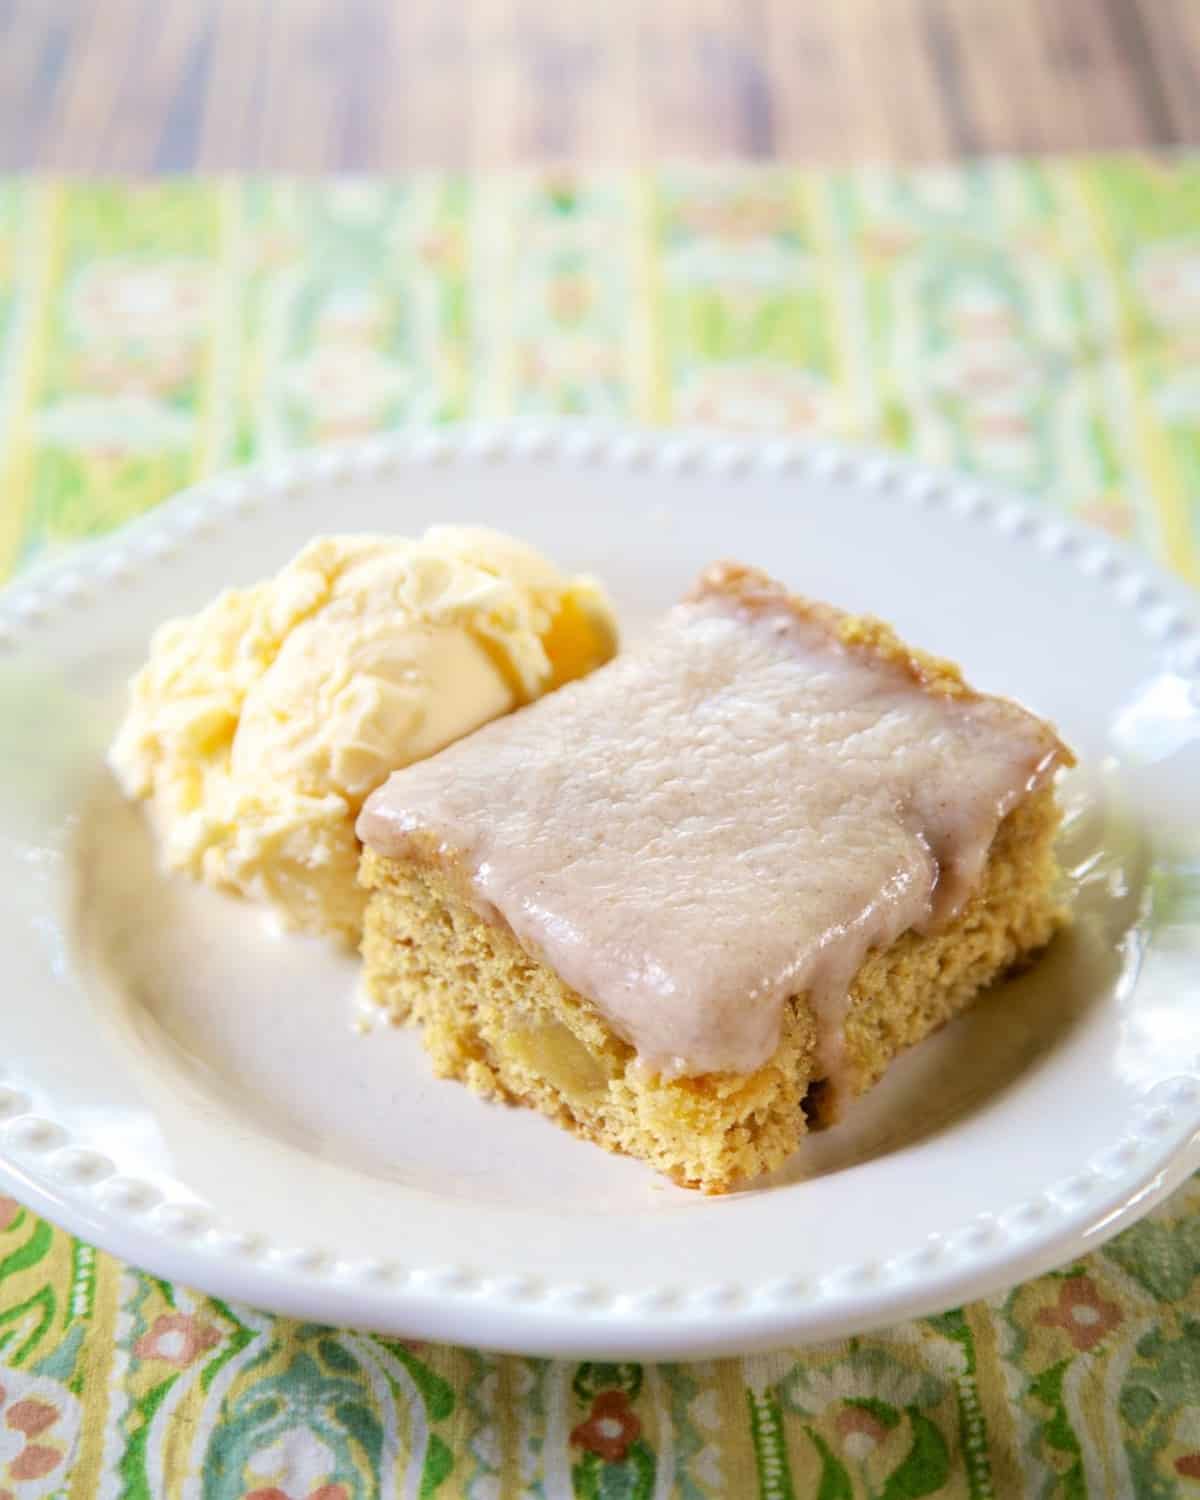 Apple Pie Cake - easy apple cake topped with a homemade cinnamon frosting. SO good!! Took this to a party and it was gone in a flash! Yellow cake mix, apple pie filling, vanilla, cinnamon, eggs, milk and powdered sugar. Serve warm with some vanilla ice cream! #cake #dessert #apple 